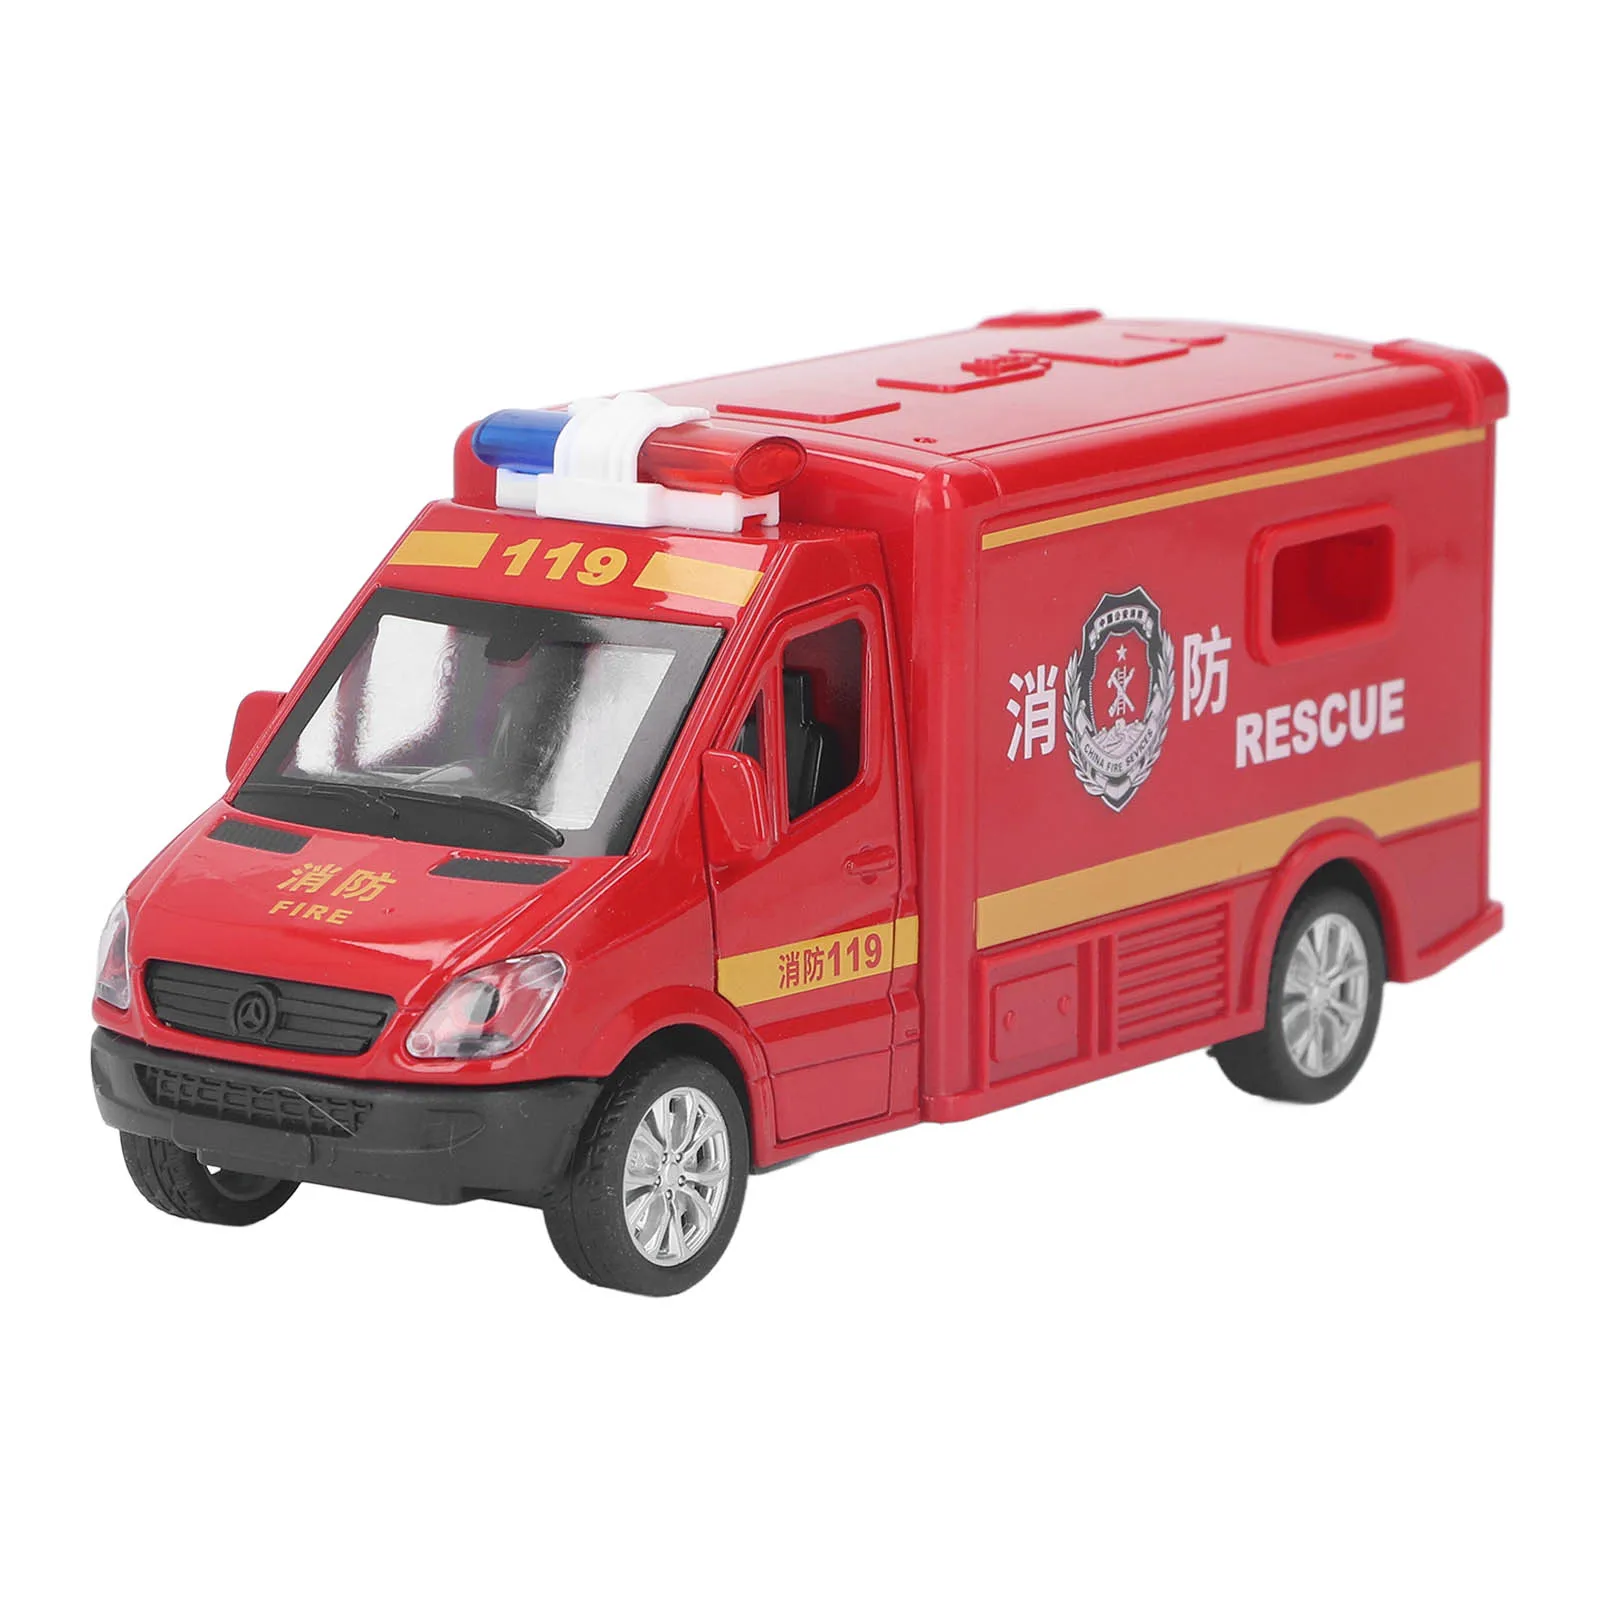 Fire Truck Alloy Simulation Car Model Innovative Sound and Lights Fire Truck Pull Back Fire Truck Toy for Kids Gifts Collection yatming 1 43 scales classic vw microbus police car 1962 mini van fire truck diecast model auto toy vehicles with acrylic box kid